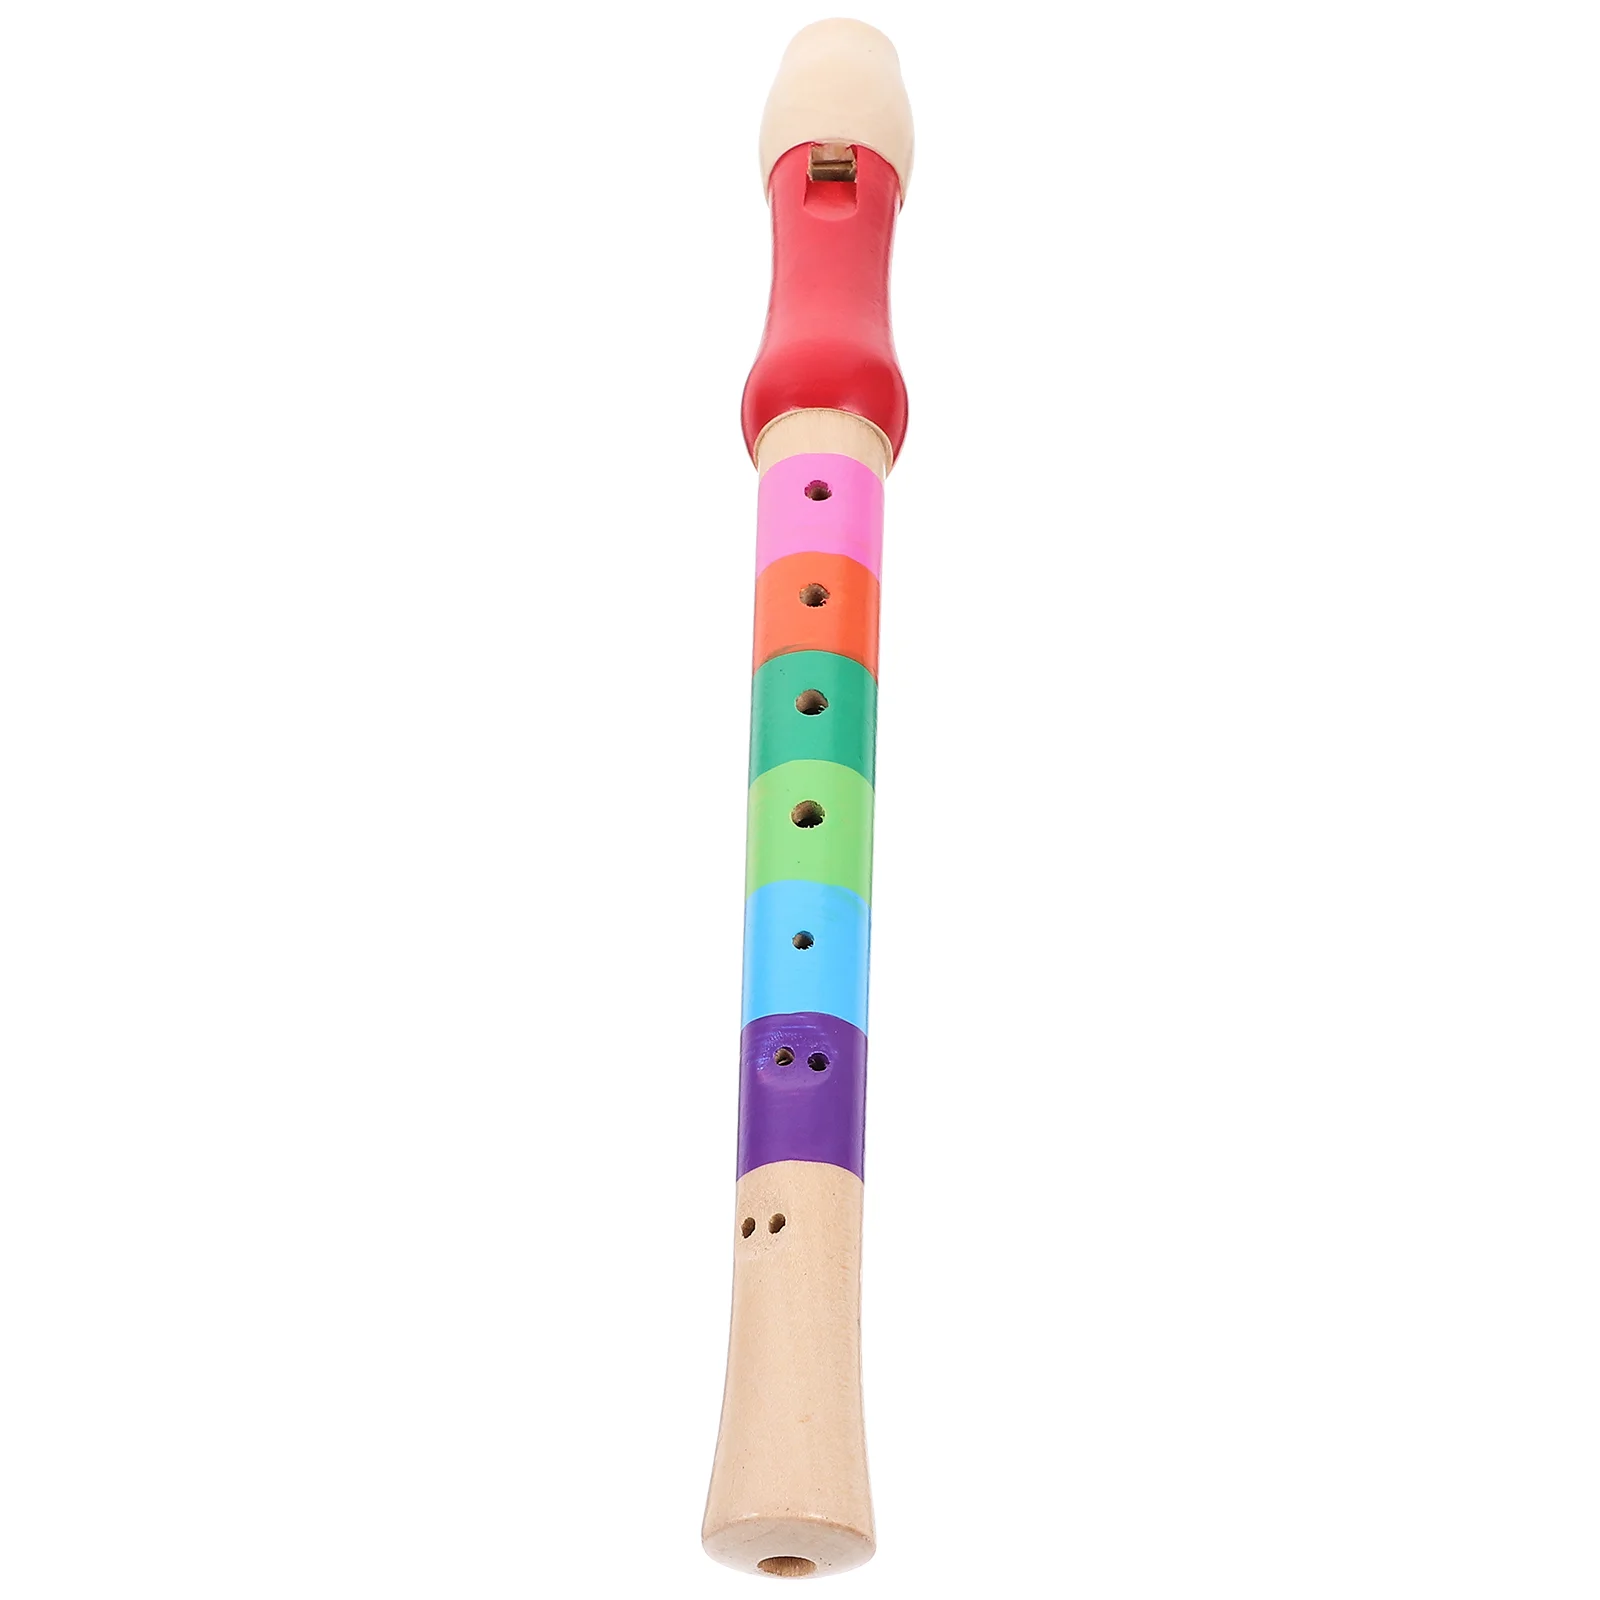 

Hole Wood Soprano Descant Recorder Flute Music Playing Wind Instruments Flute Instrument Musical C Key Wooden(Color random)